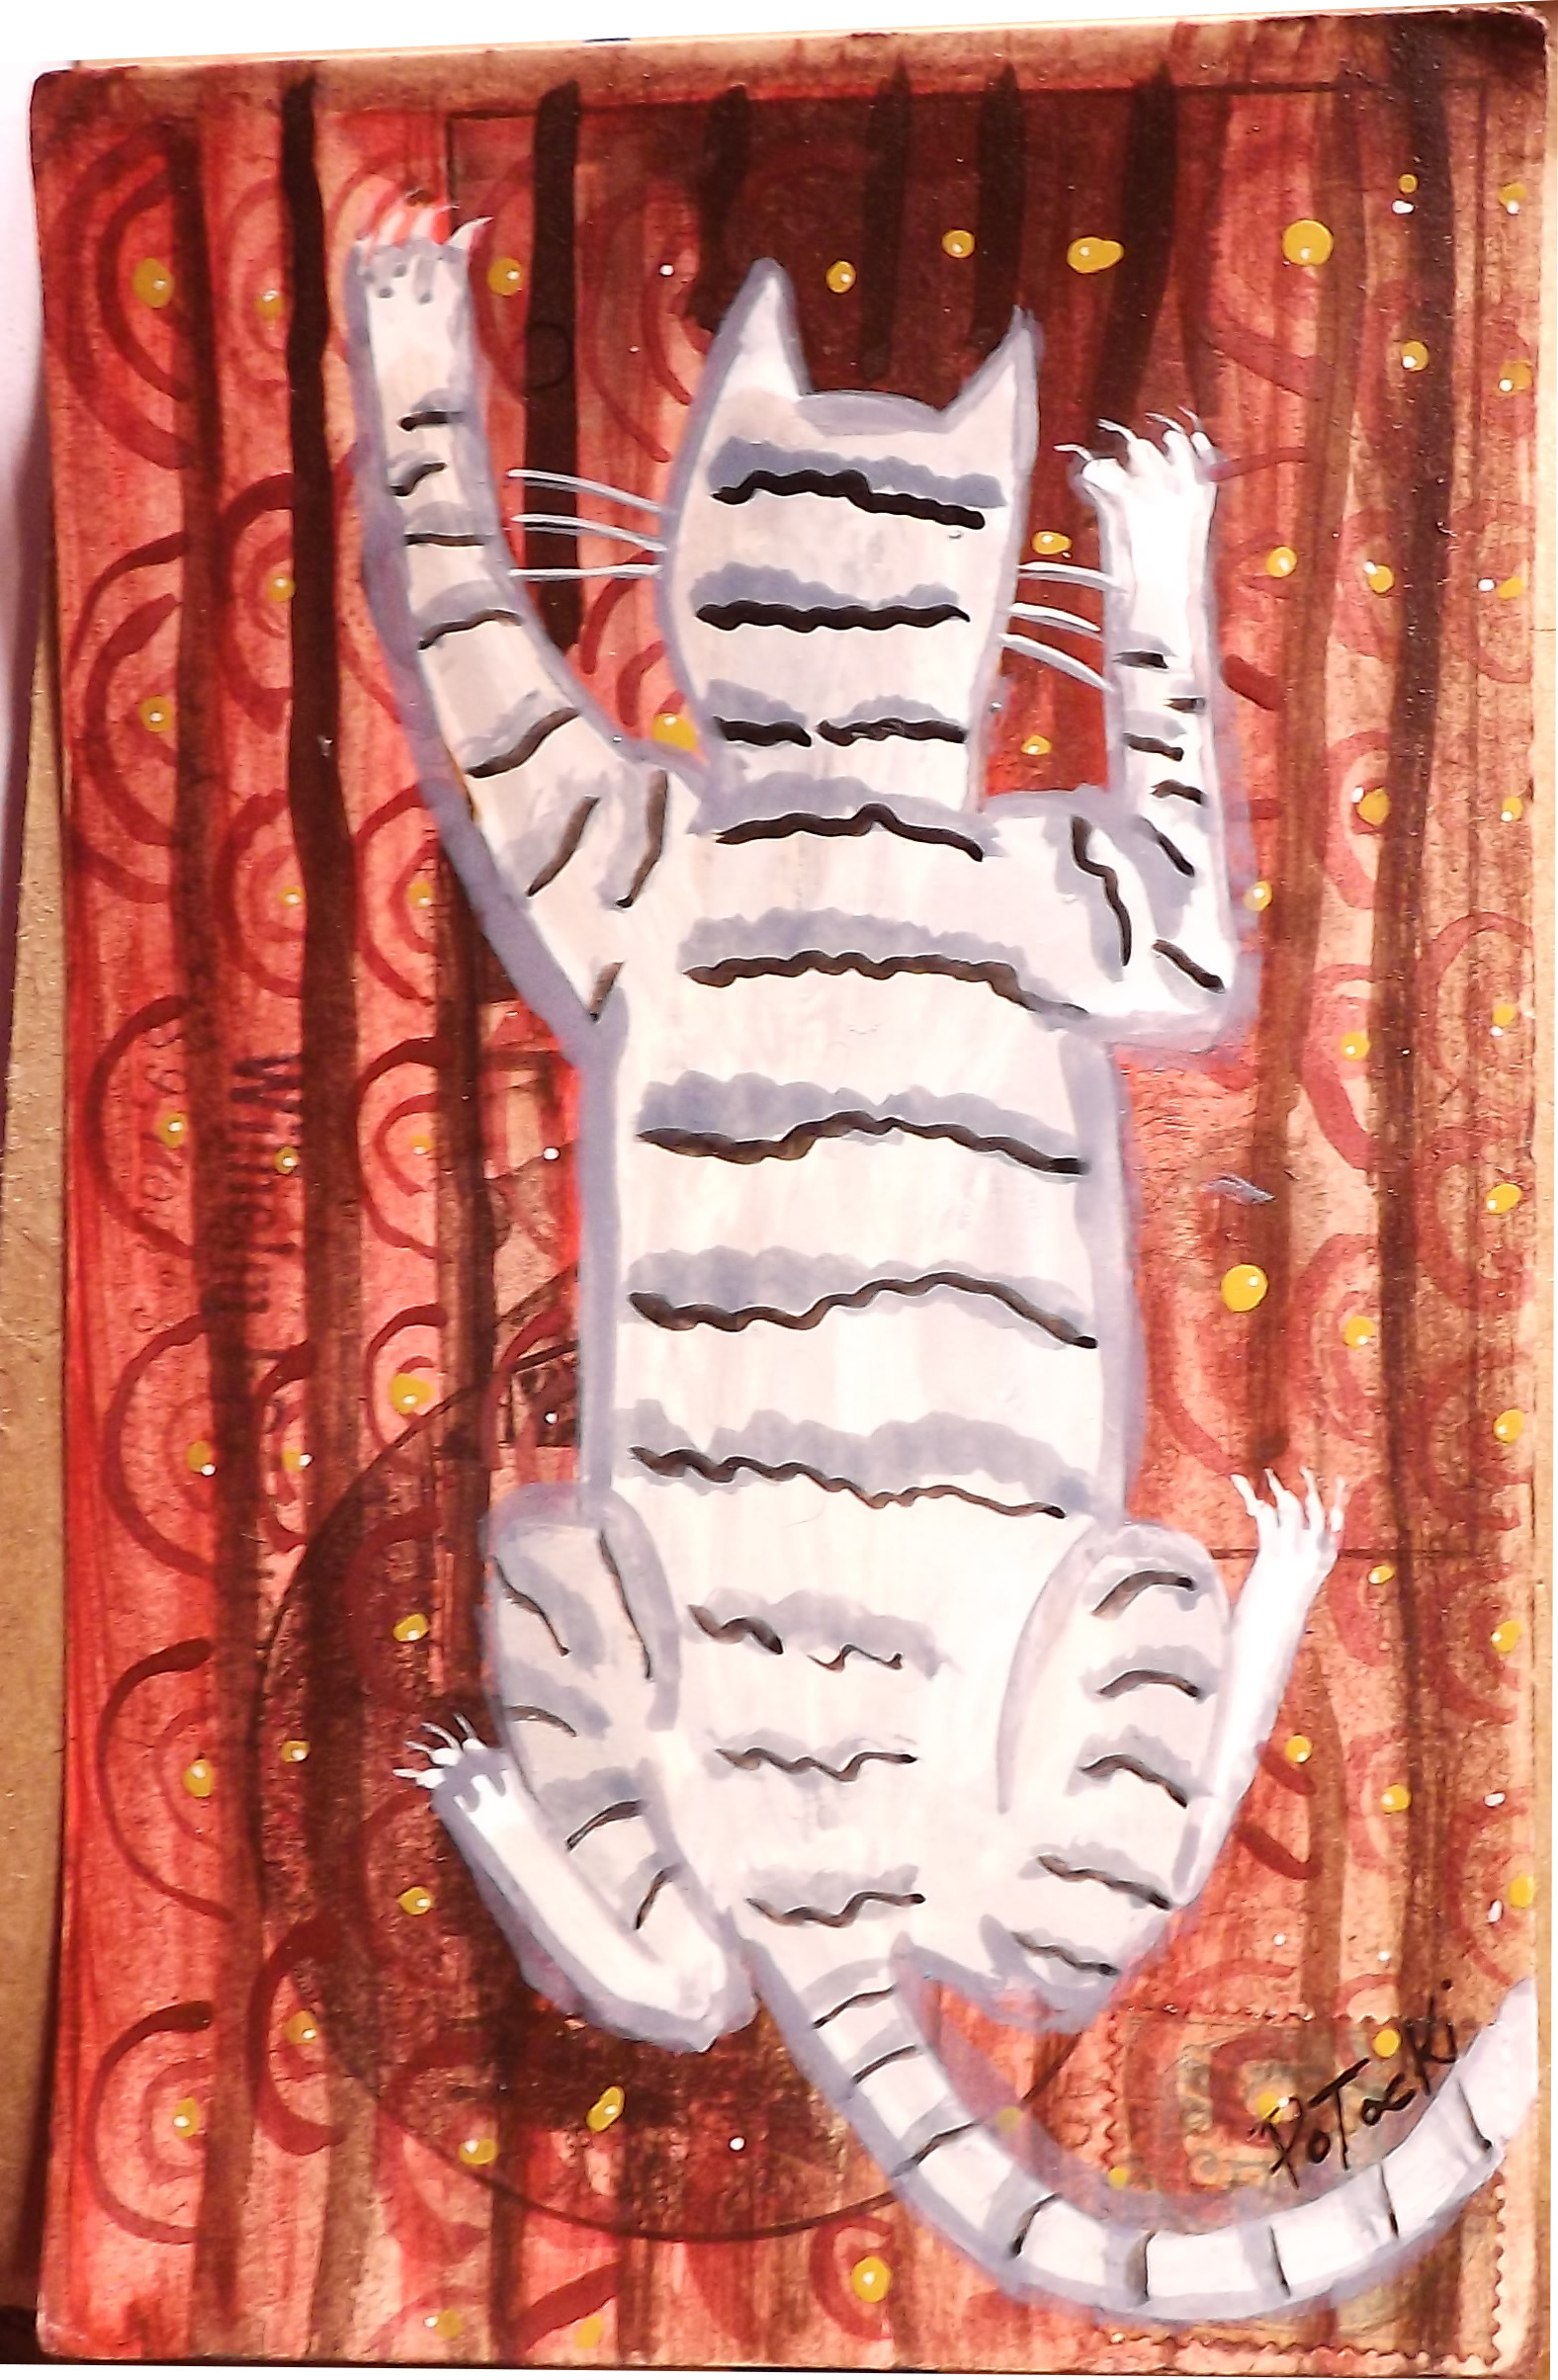 The Cat Who Climbed all the Curtains Original Painting on Vintage Postcard